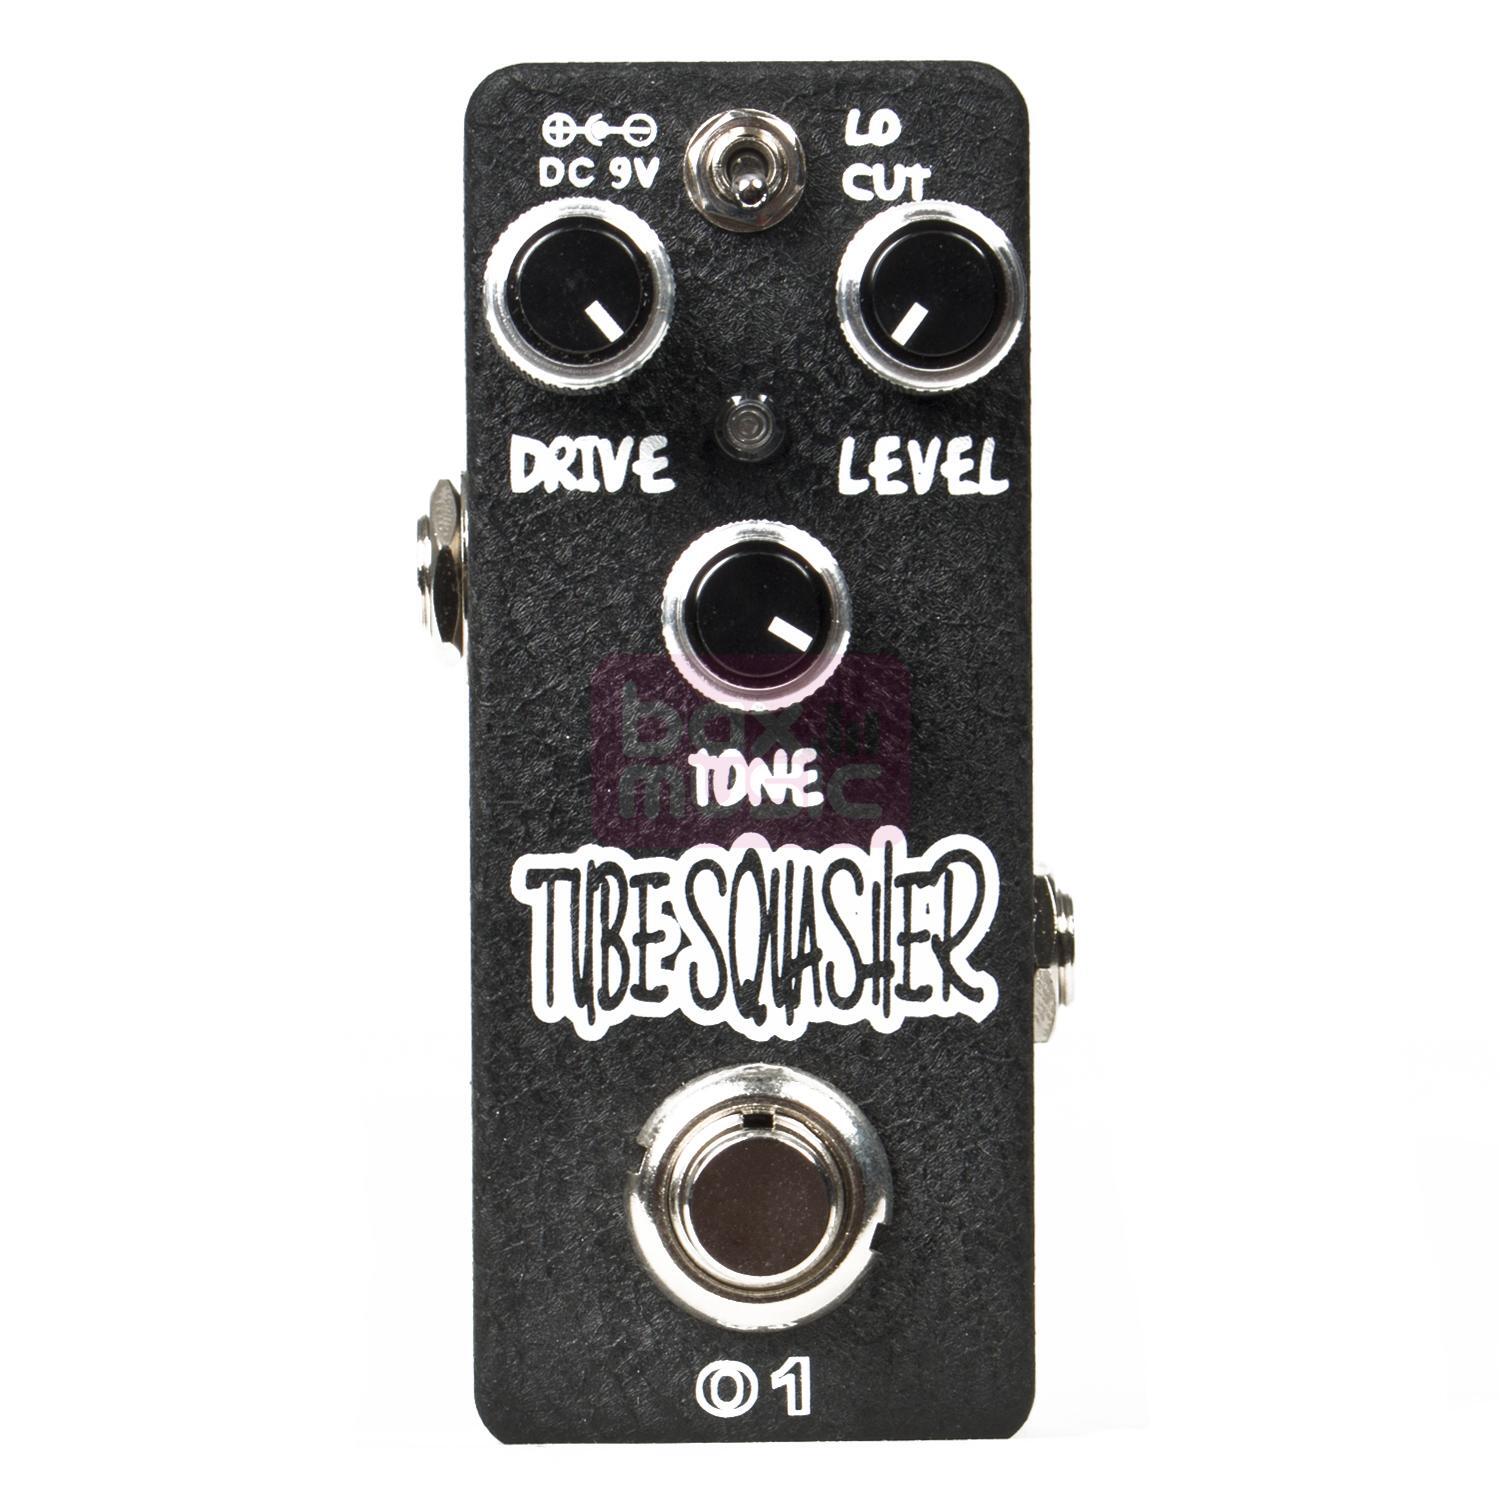 Xvive O 1 Tube Squasher Overdrive effectpedaal